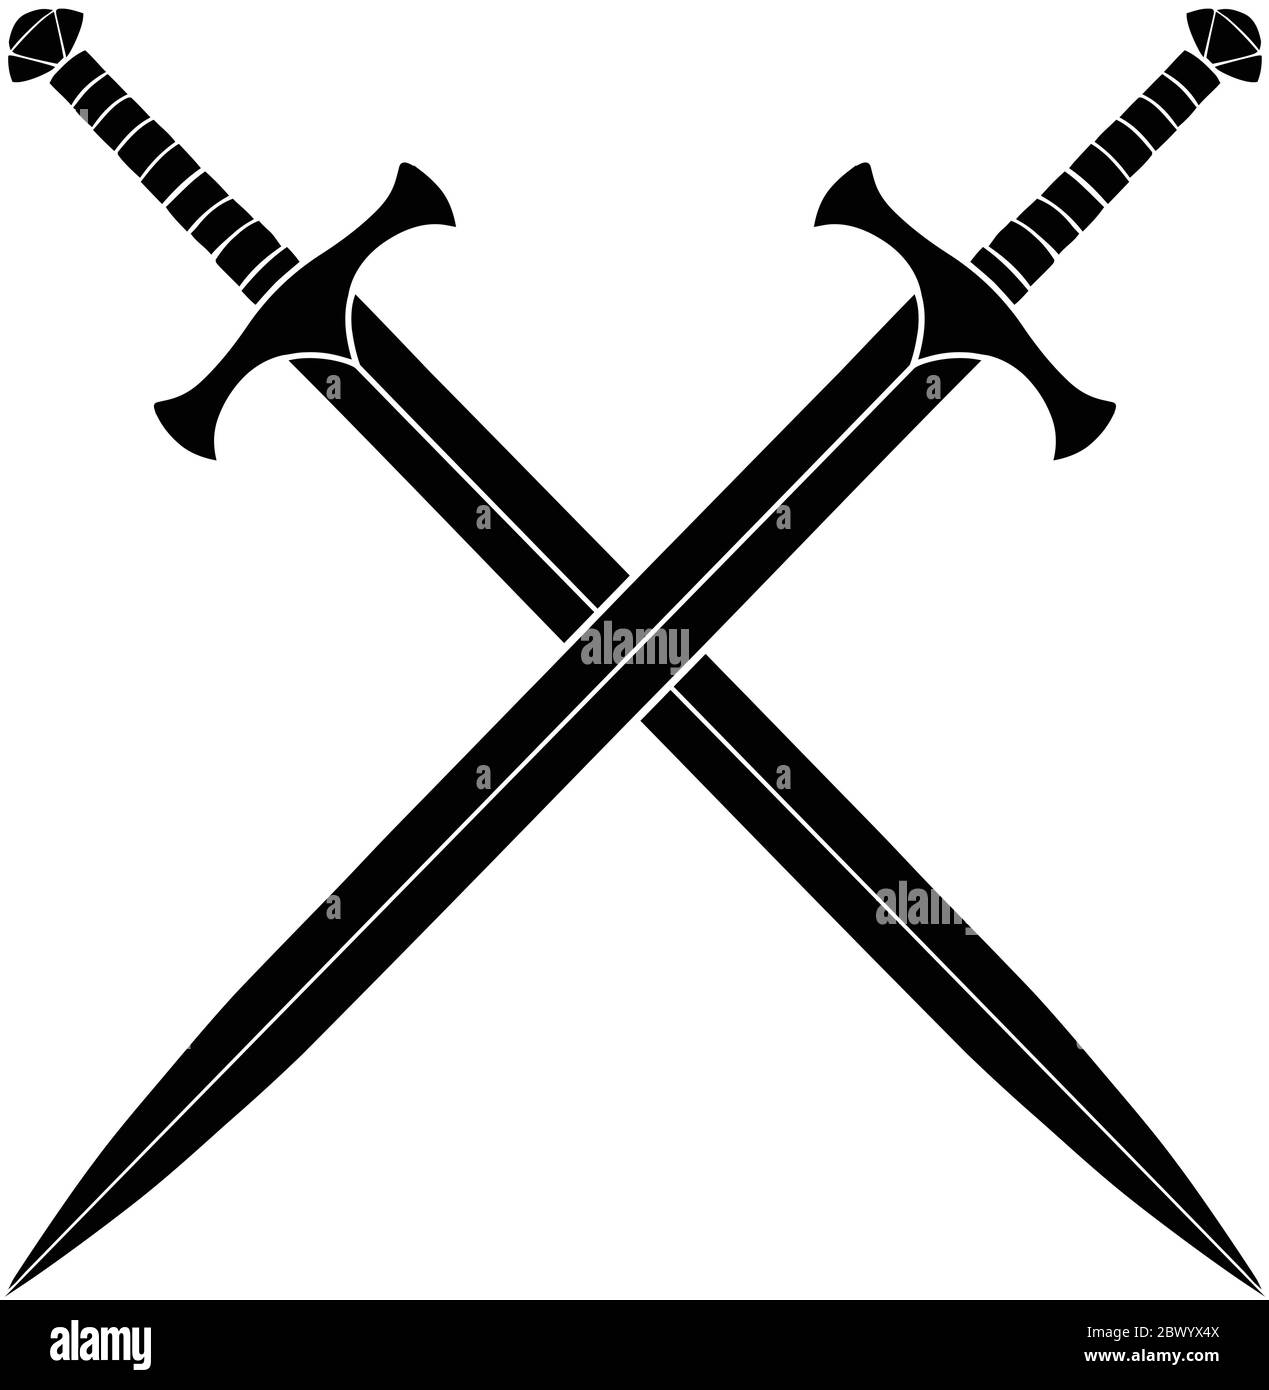 Crossed Swords Silhouette- An Illustration of a Crossed Swords Silhouette. Stock Vector